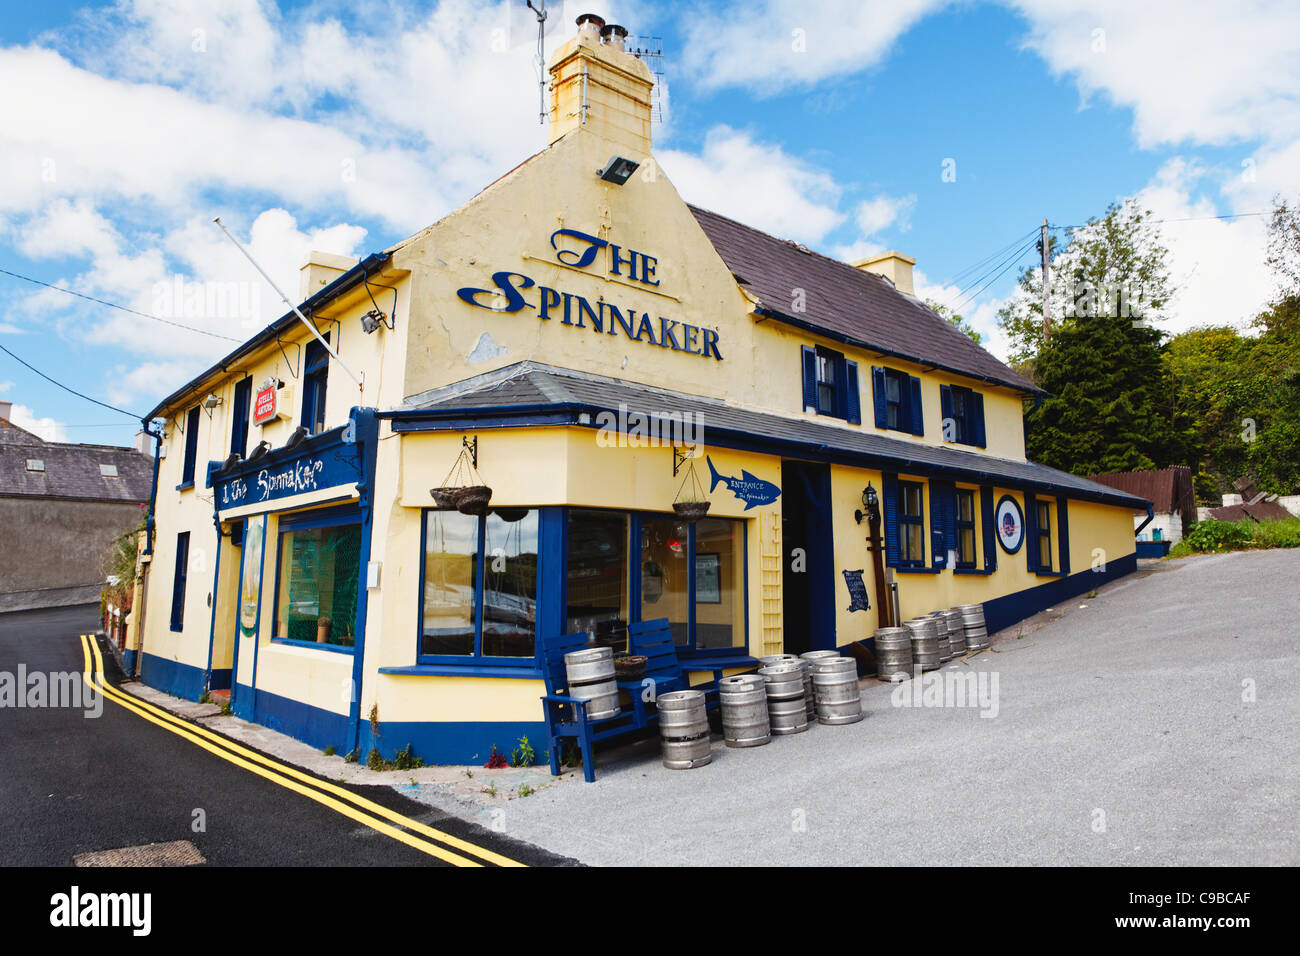 Exterior View of the Spnnaker Restaurant and Bar, Scilly, Kinsale, County Cork, Republic of Ireland Stock Photo